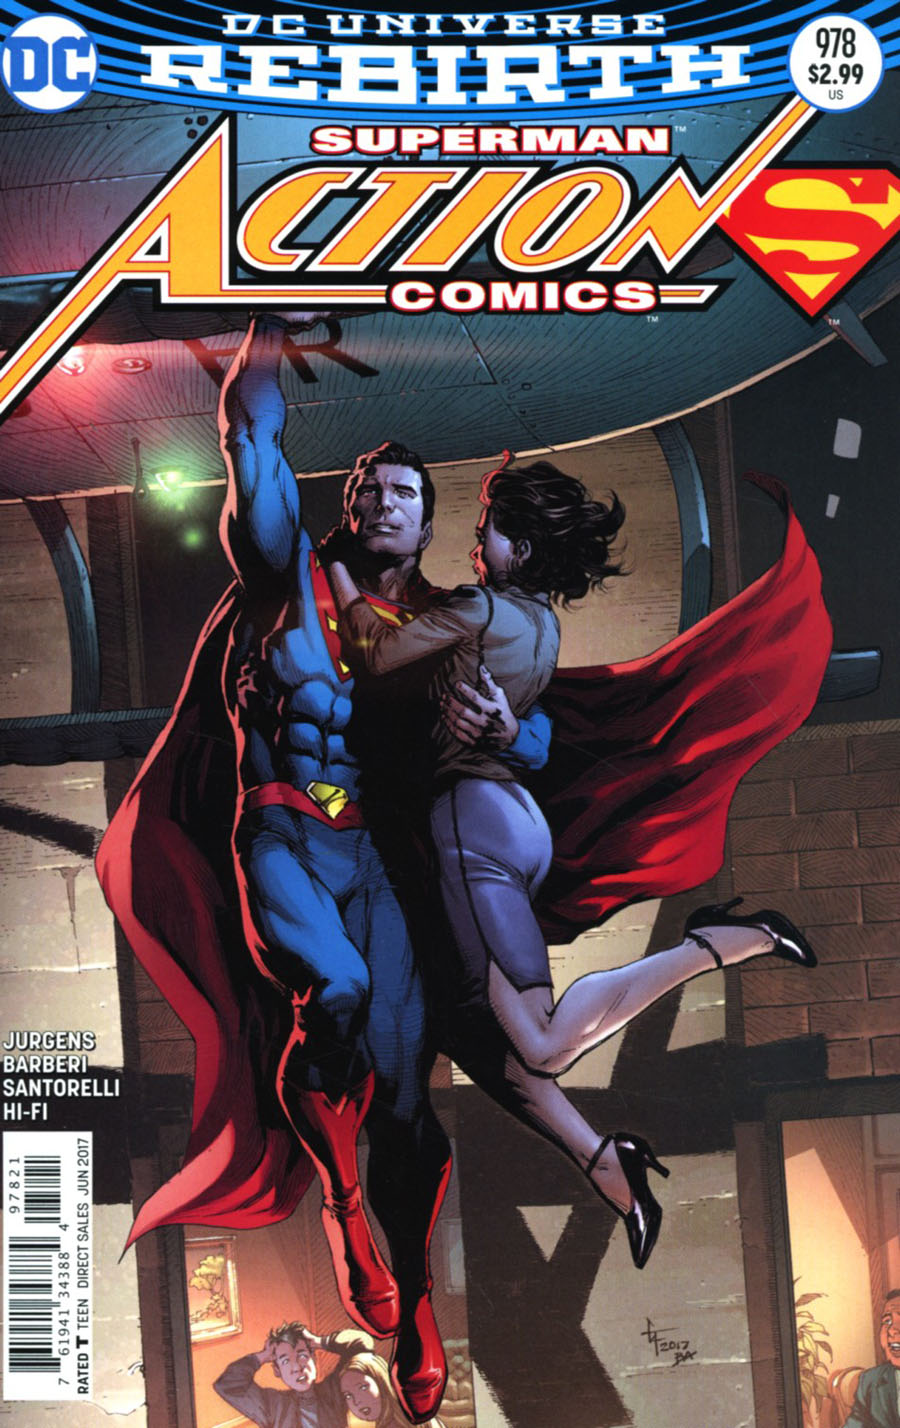 Action Comics Vol 2 #978 Cover B Variant Gary Frank Cover (Superman Reborn Aftermath Tie-In)